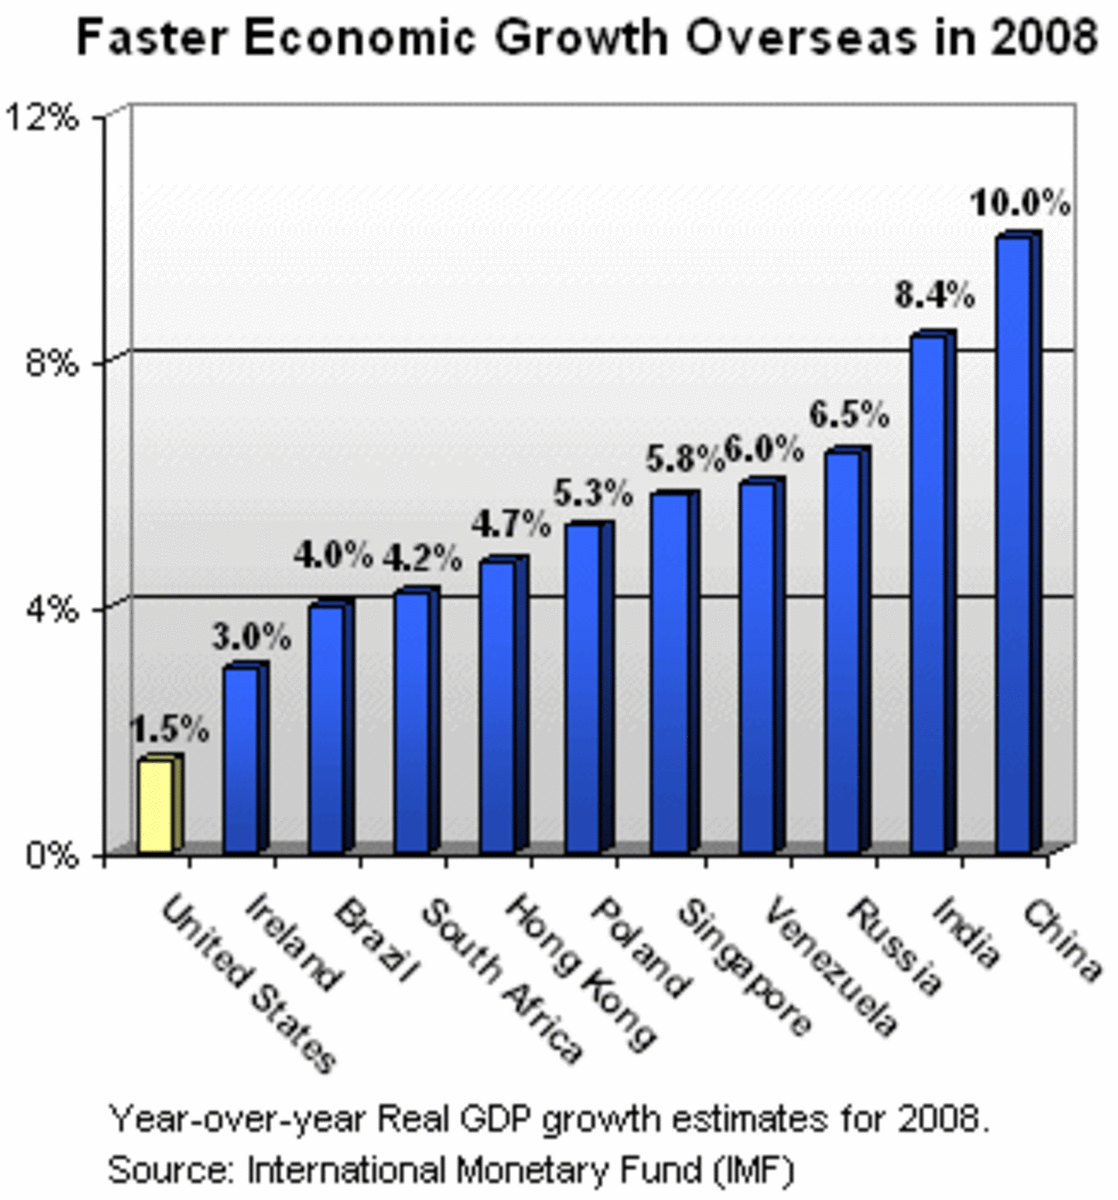 What Steps Would We Need to Take in Order to Raise Our Economic Growth Rate